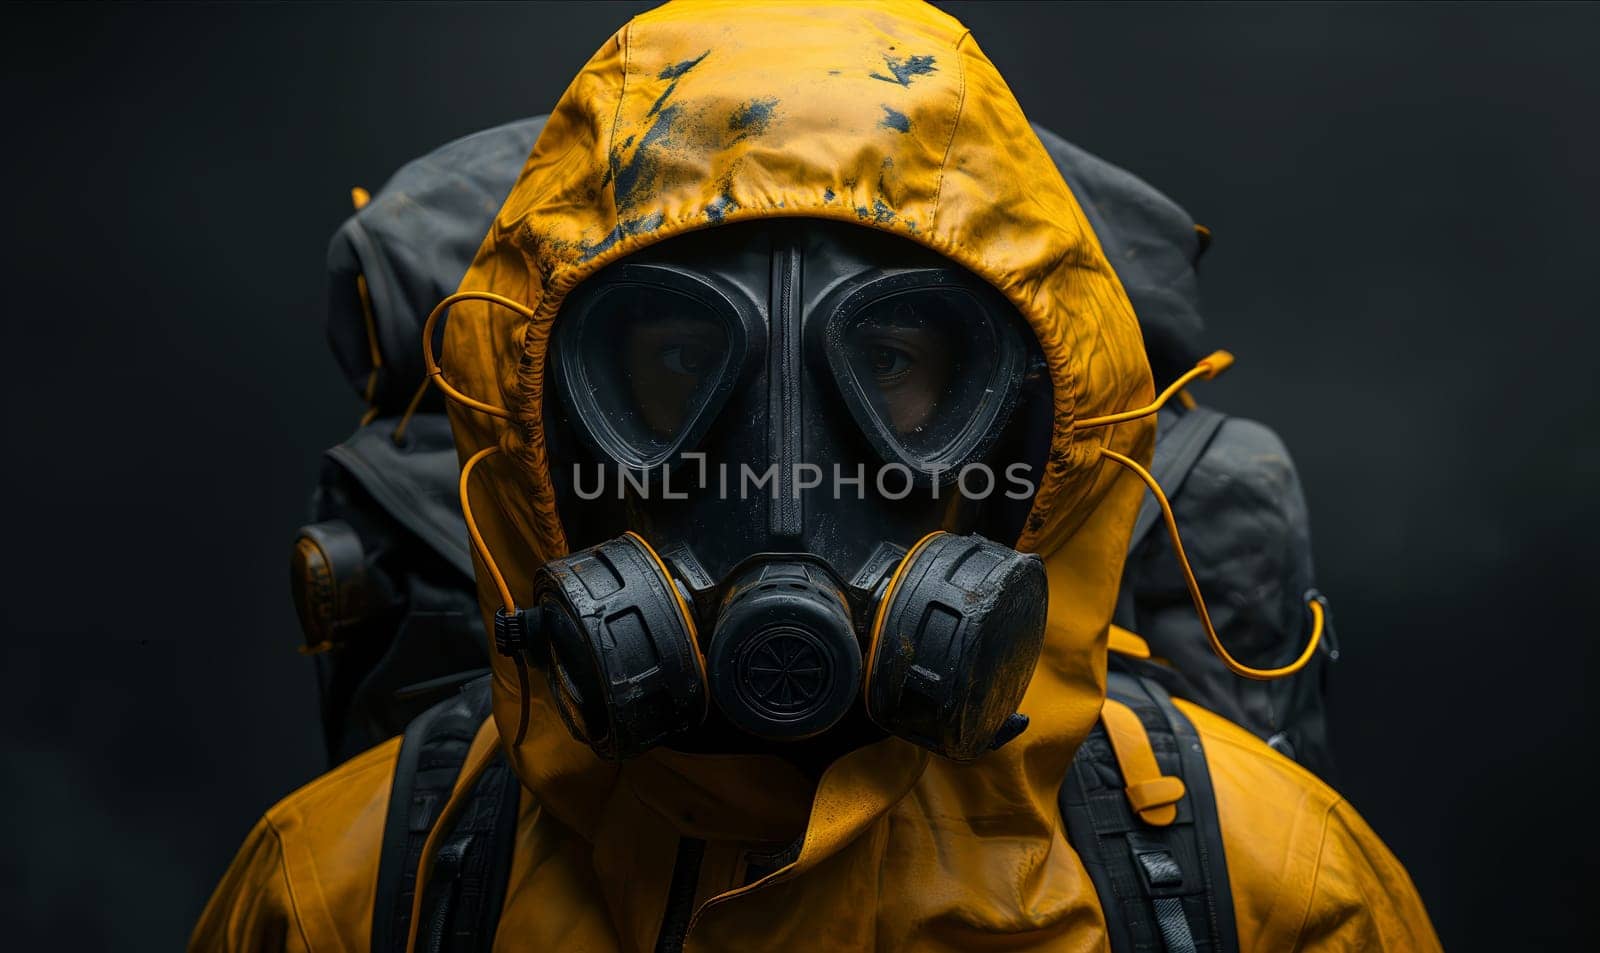 A man in a gas mask against a background of black smoke. by Fischeron